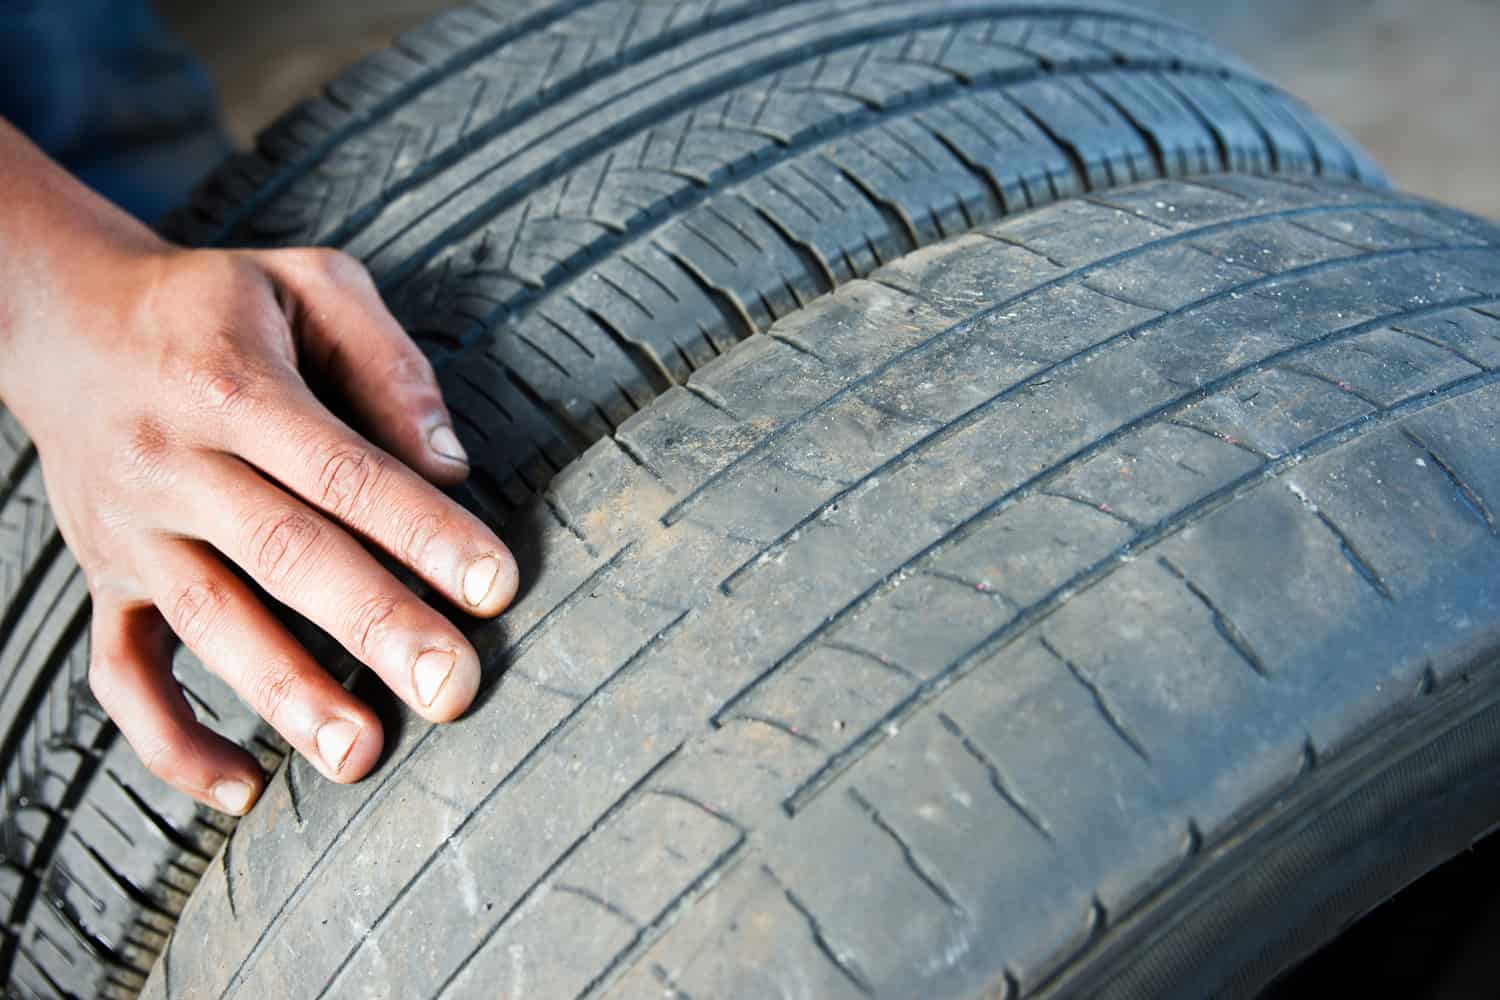 A photograph comparing a dangerously worn tire beside a newer tire with acceptable tread.